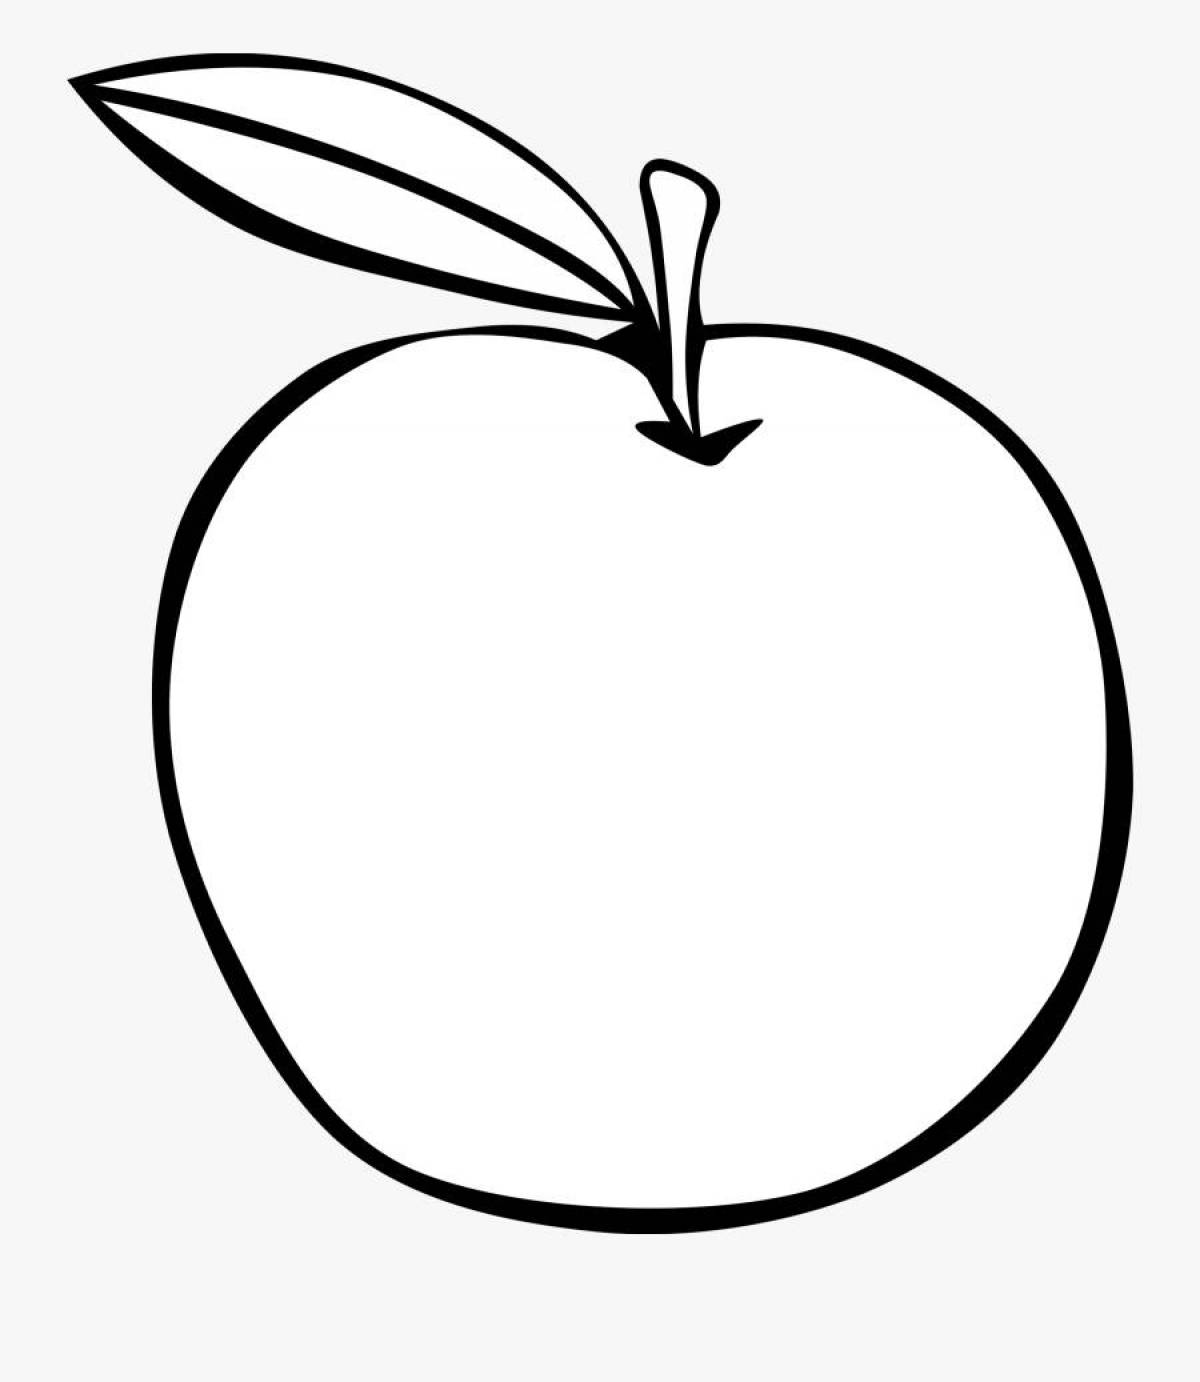 Sparkly apples coloring book for kids